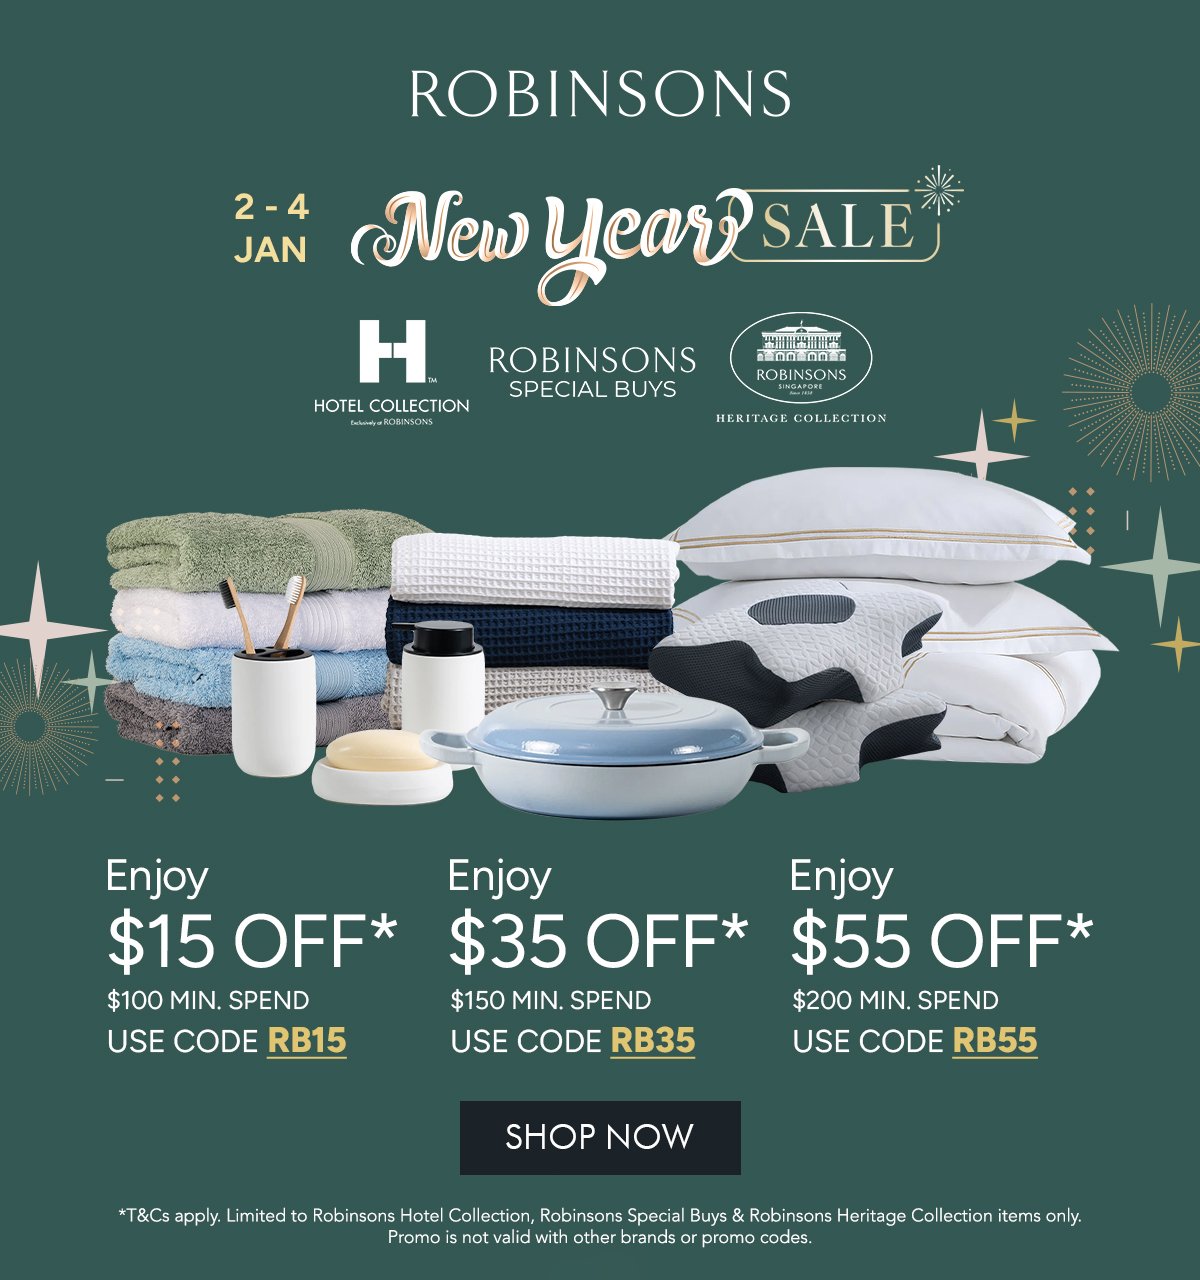 HOTEL COLLECTION, ROBINSONS SPECIAL BUYS & HERITAGE COLLECTION